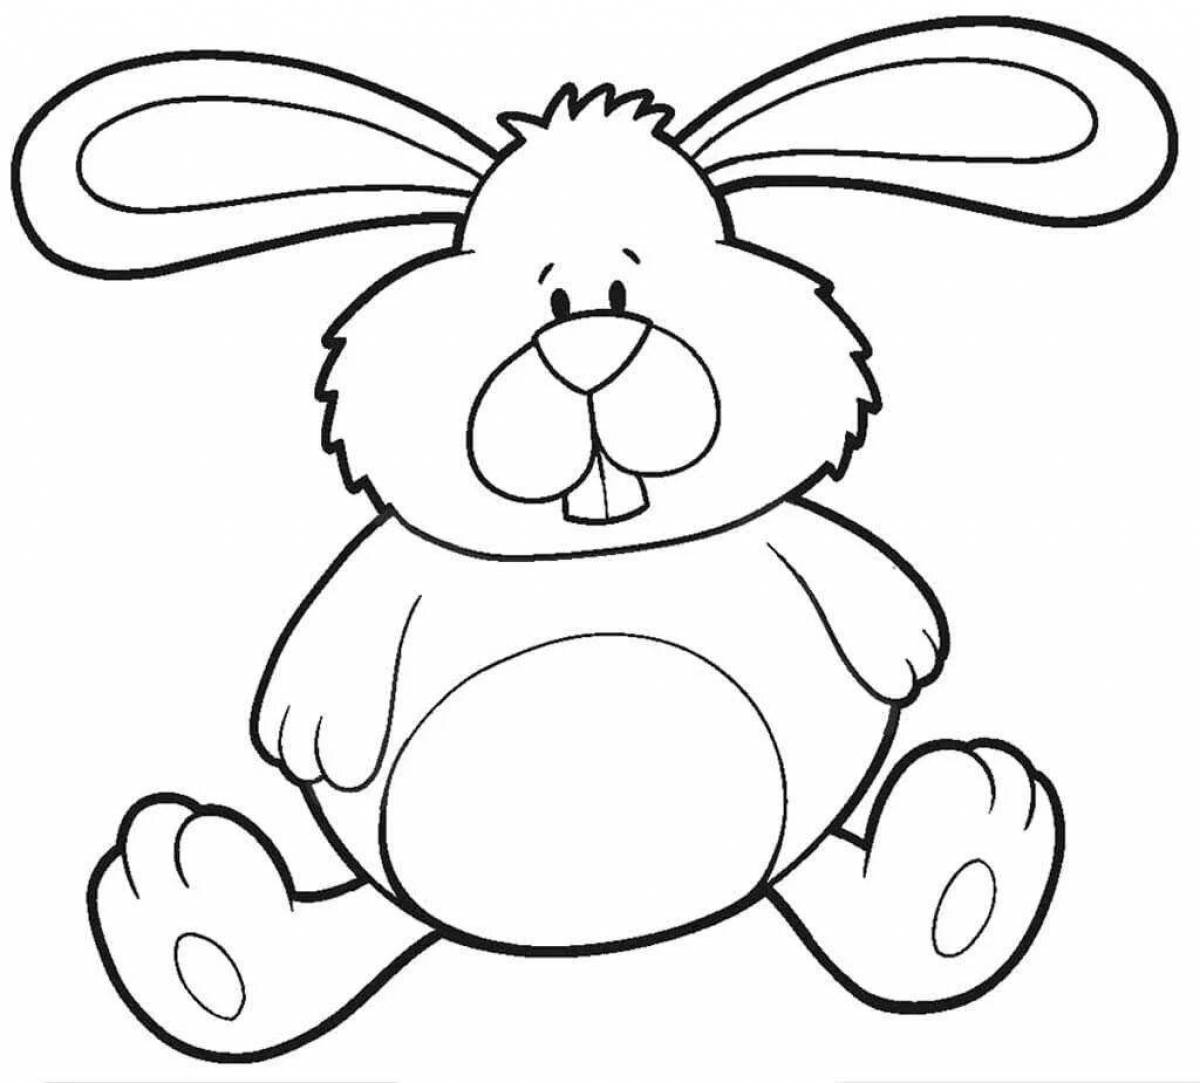 Adorable rabbit coloring book for 2-3 year olds